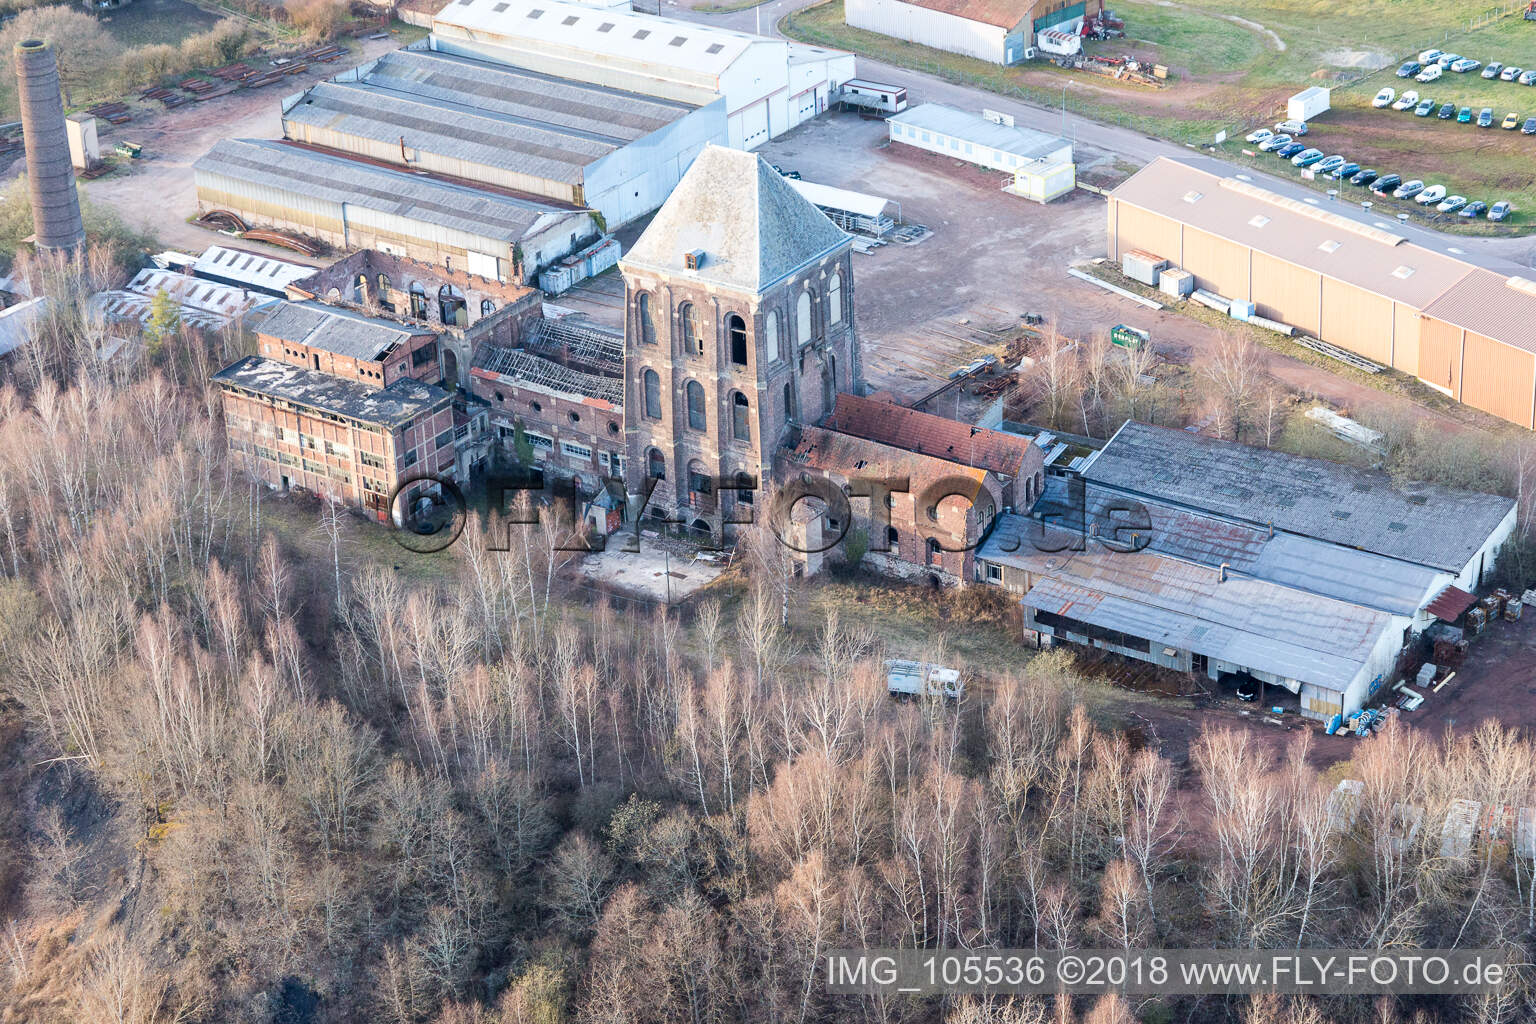 Oblique view of Former steelworks (Burgundy) in Épinac in the state Saone et Loire, France